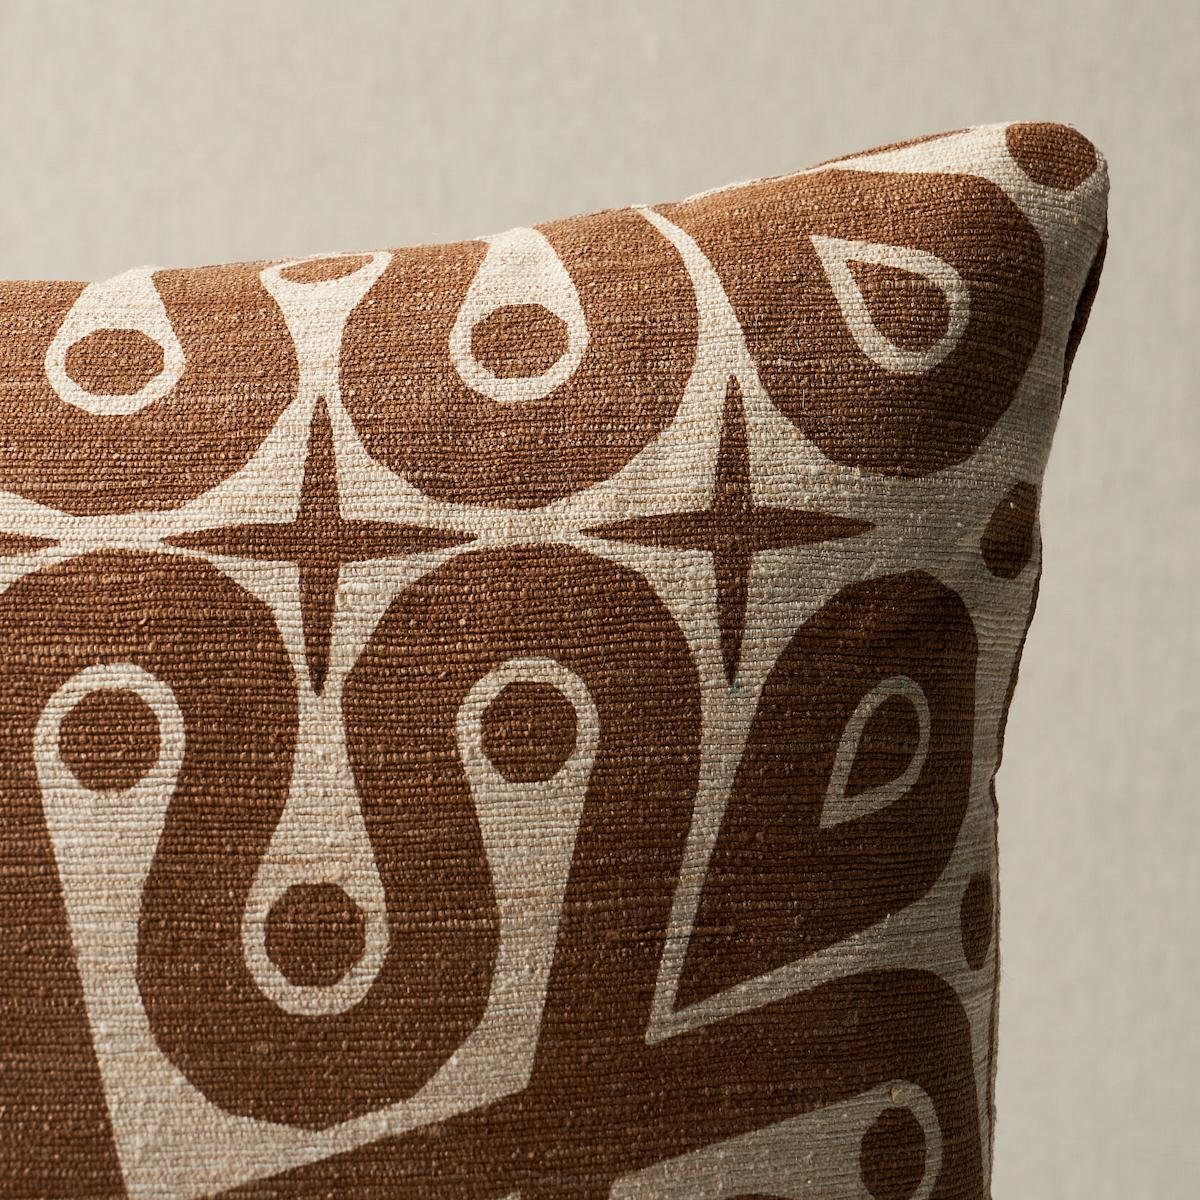 This pillow features Borneo Silk by Celerie Kemblewith a knife edge finish. Celerie Kemble was inspired by a Southeast Asian object in her personal collection when she created Borneo Silk. Pillow includes a feather/down fill insert and hidden zipper